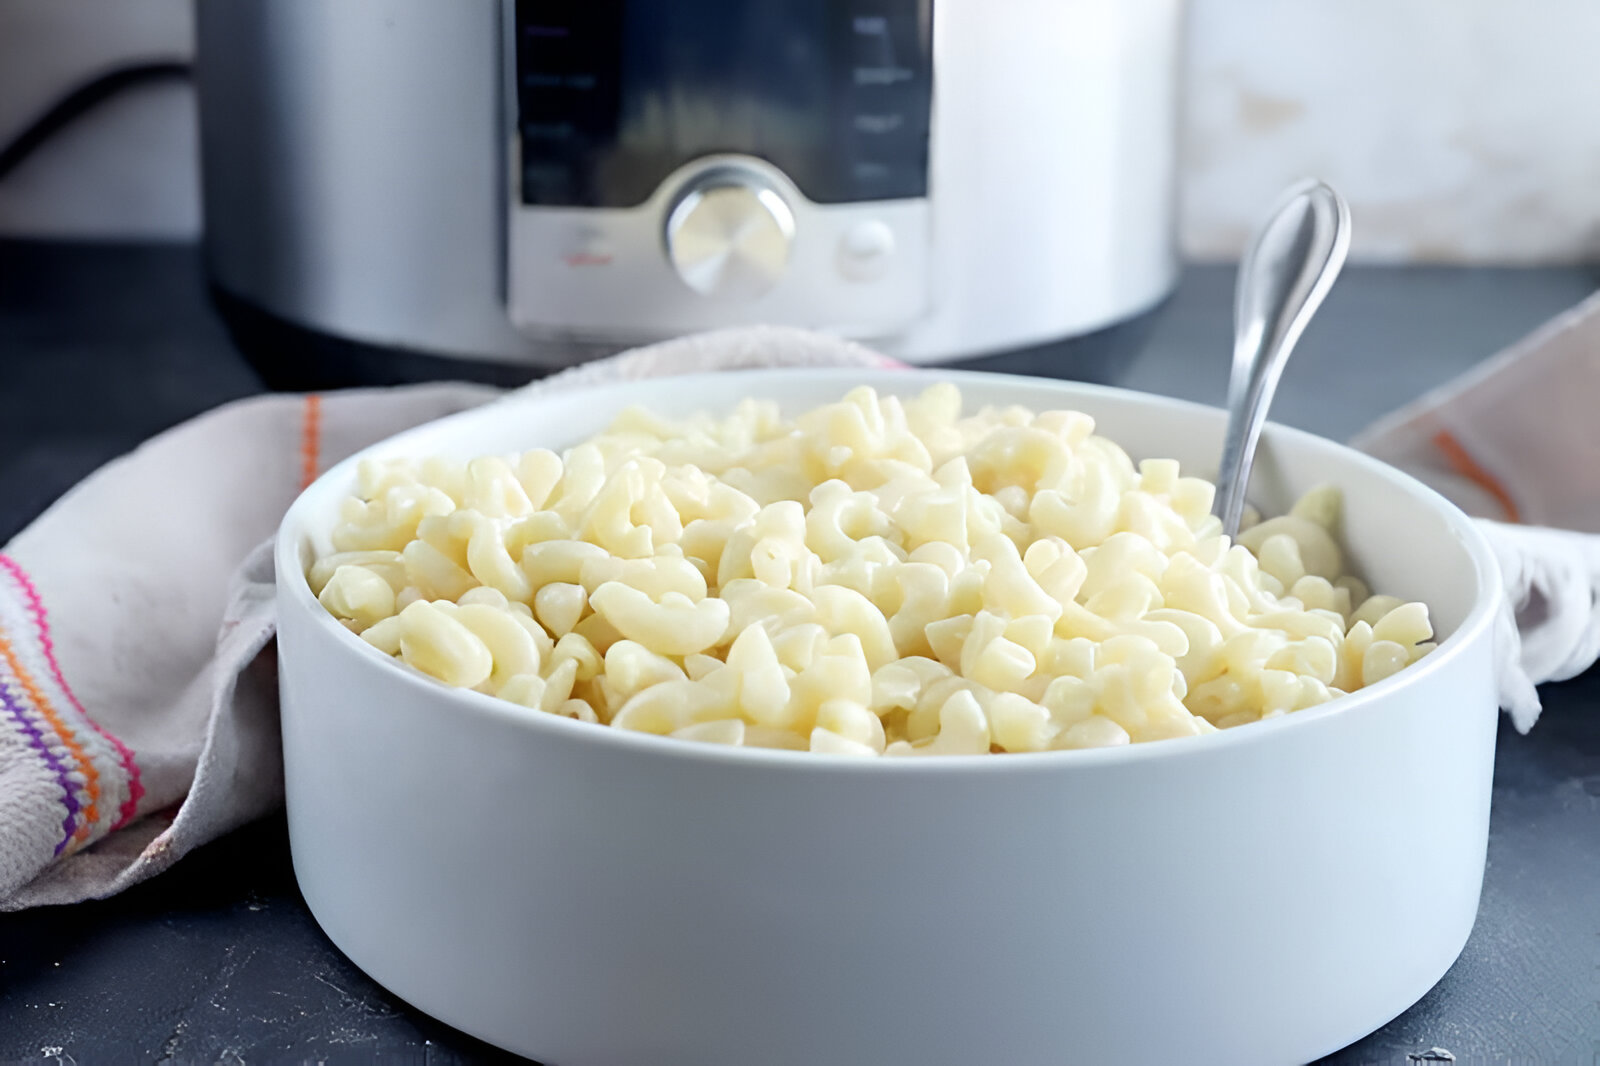 How To Cook Macaroni In An Electric Pressure Cooker